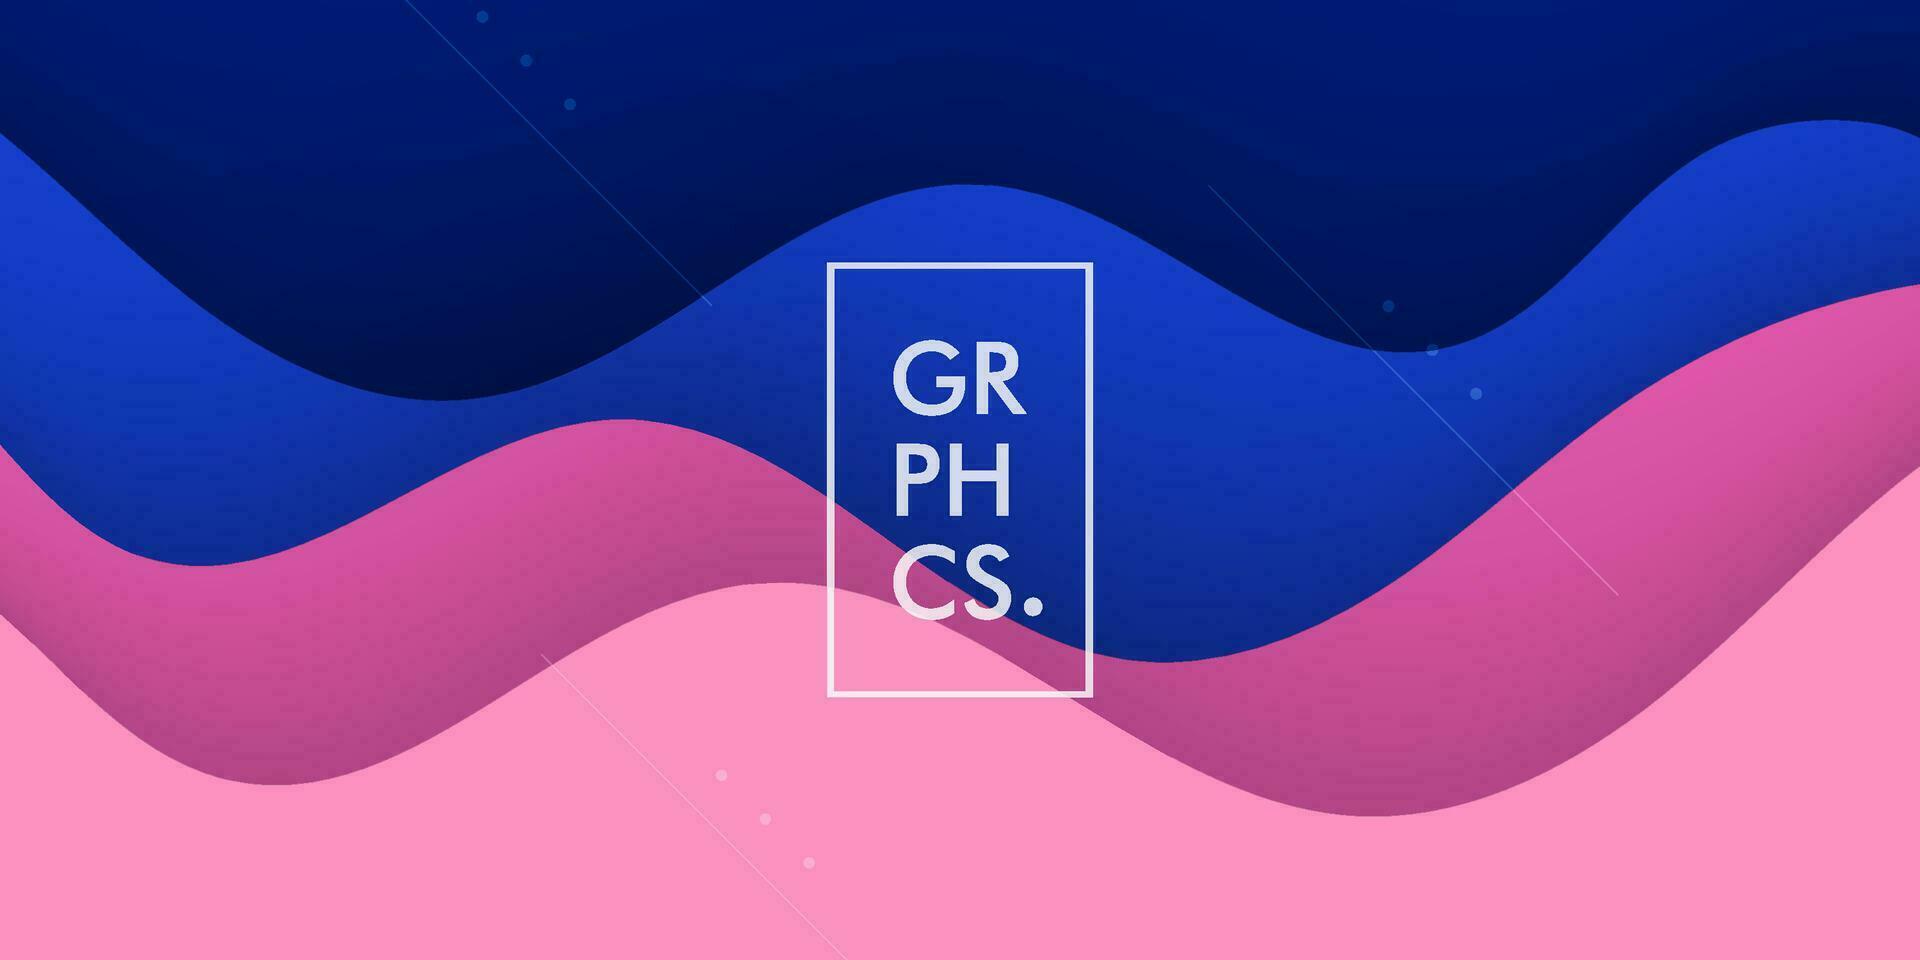 Colorful wave background design pink and blue abstract background. Eps10 vector